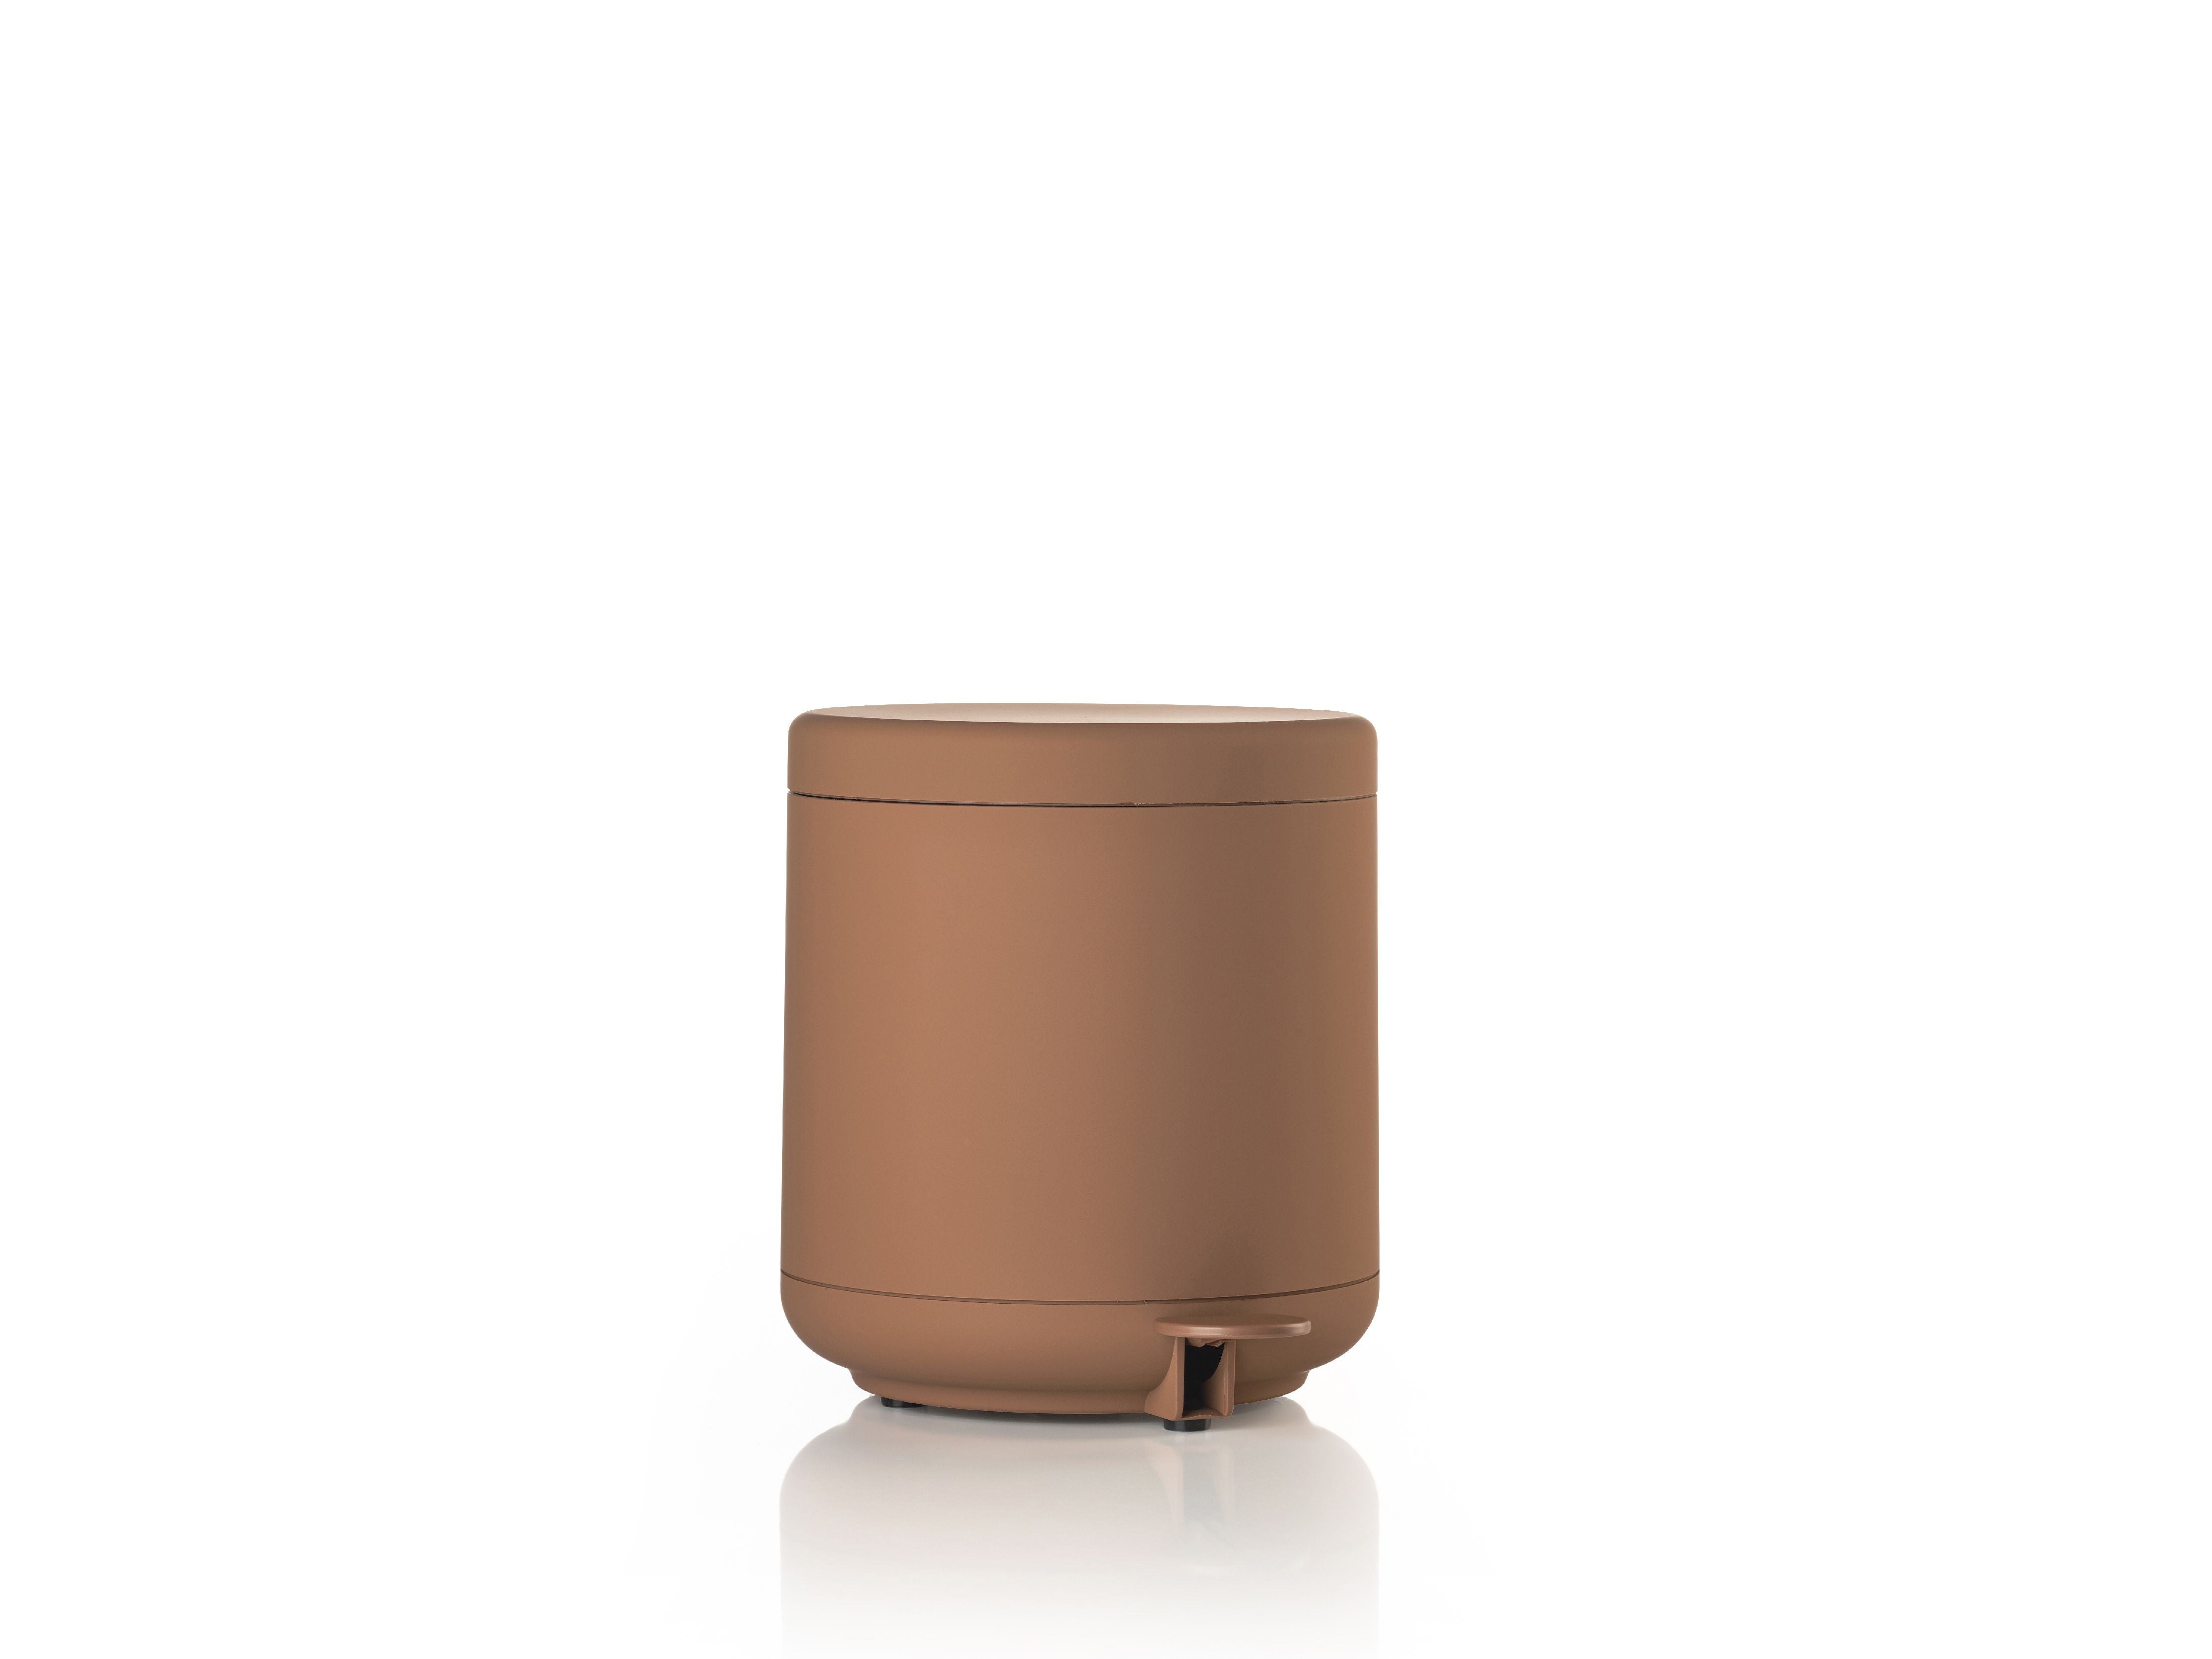 A small Zone Denmark Ume Pedal Bin 4 Liter, Terracotta bath collection container sitting on a white surface.